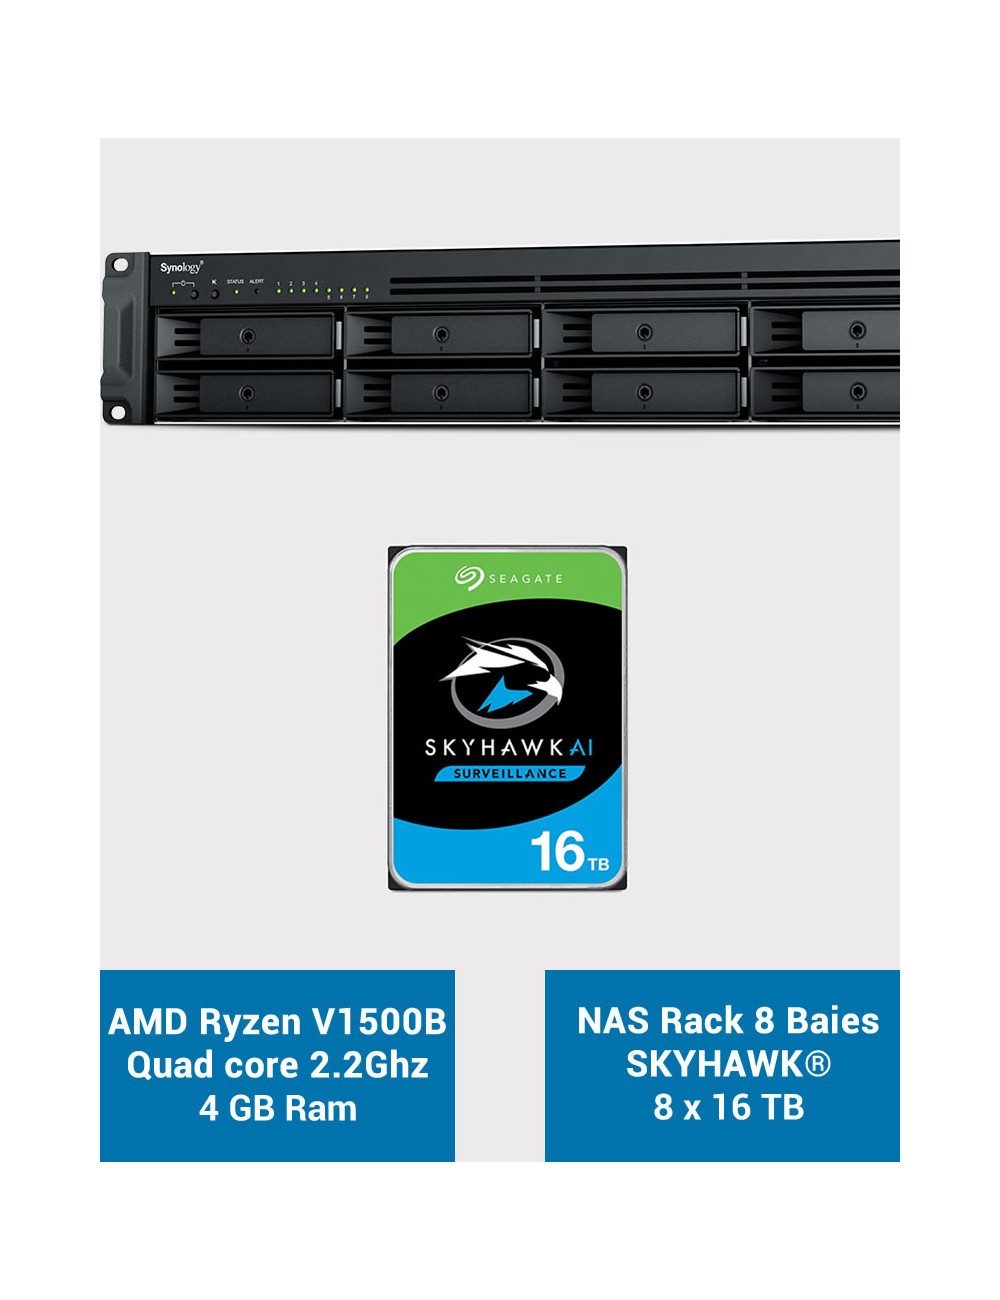 Synology RS1221+ Serveur NAS Rack SKYHAWK 128To (8x16To)